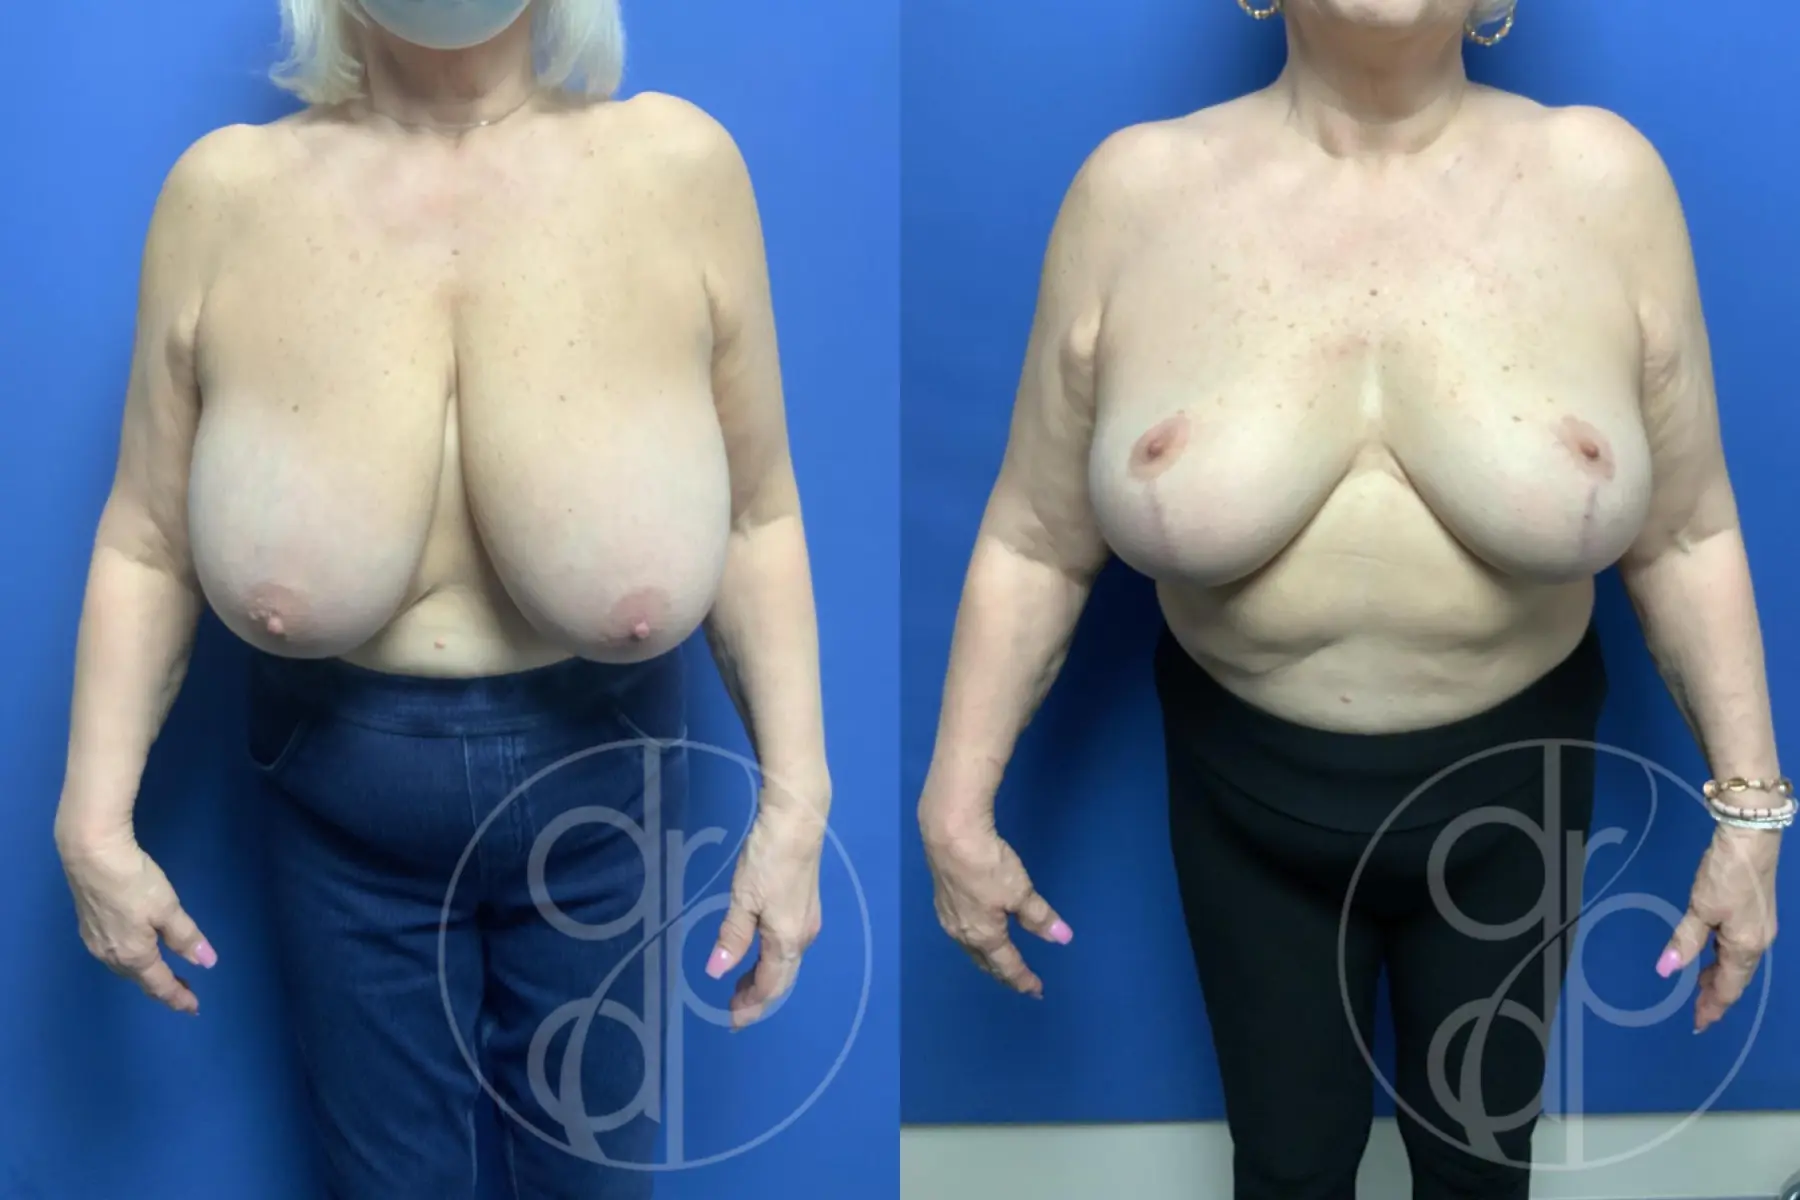 Breast Reduction: Patient 4 - Before and After  